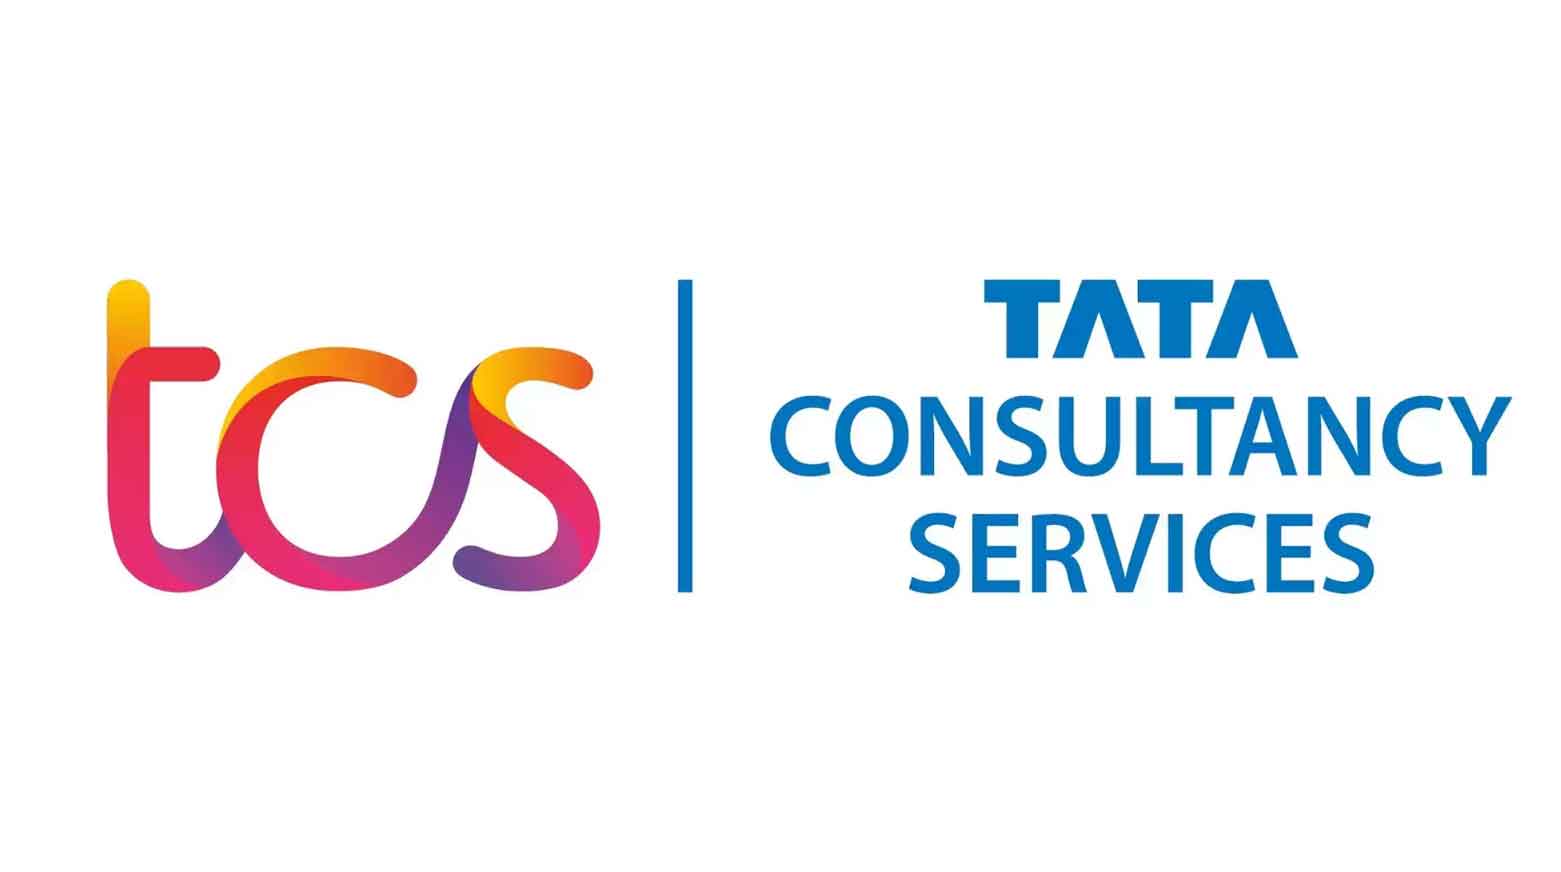 TCS is hiring experienced software engineers across India | Apply Now